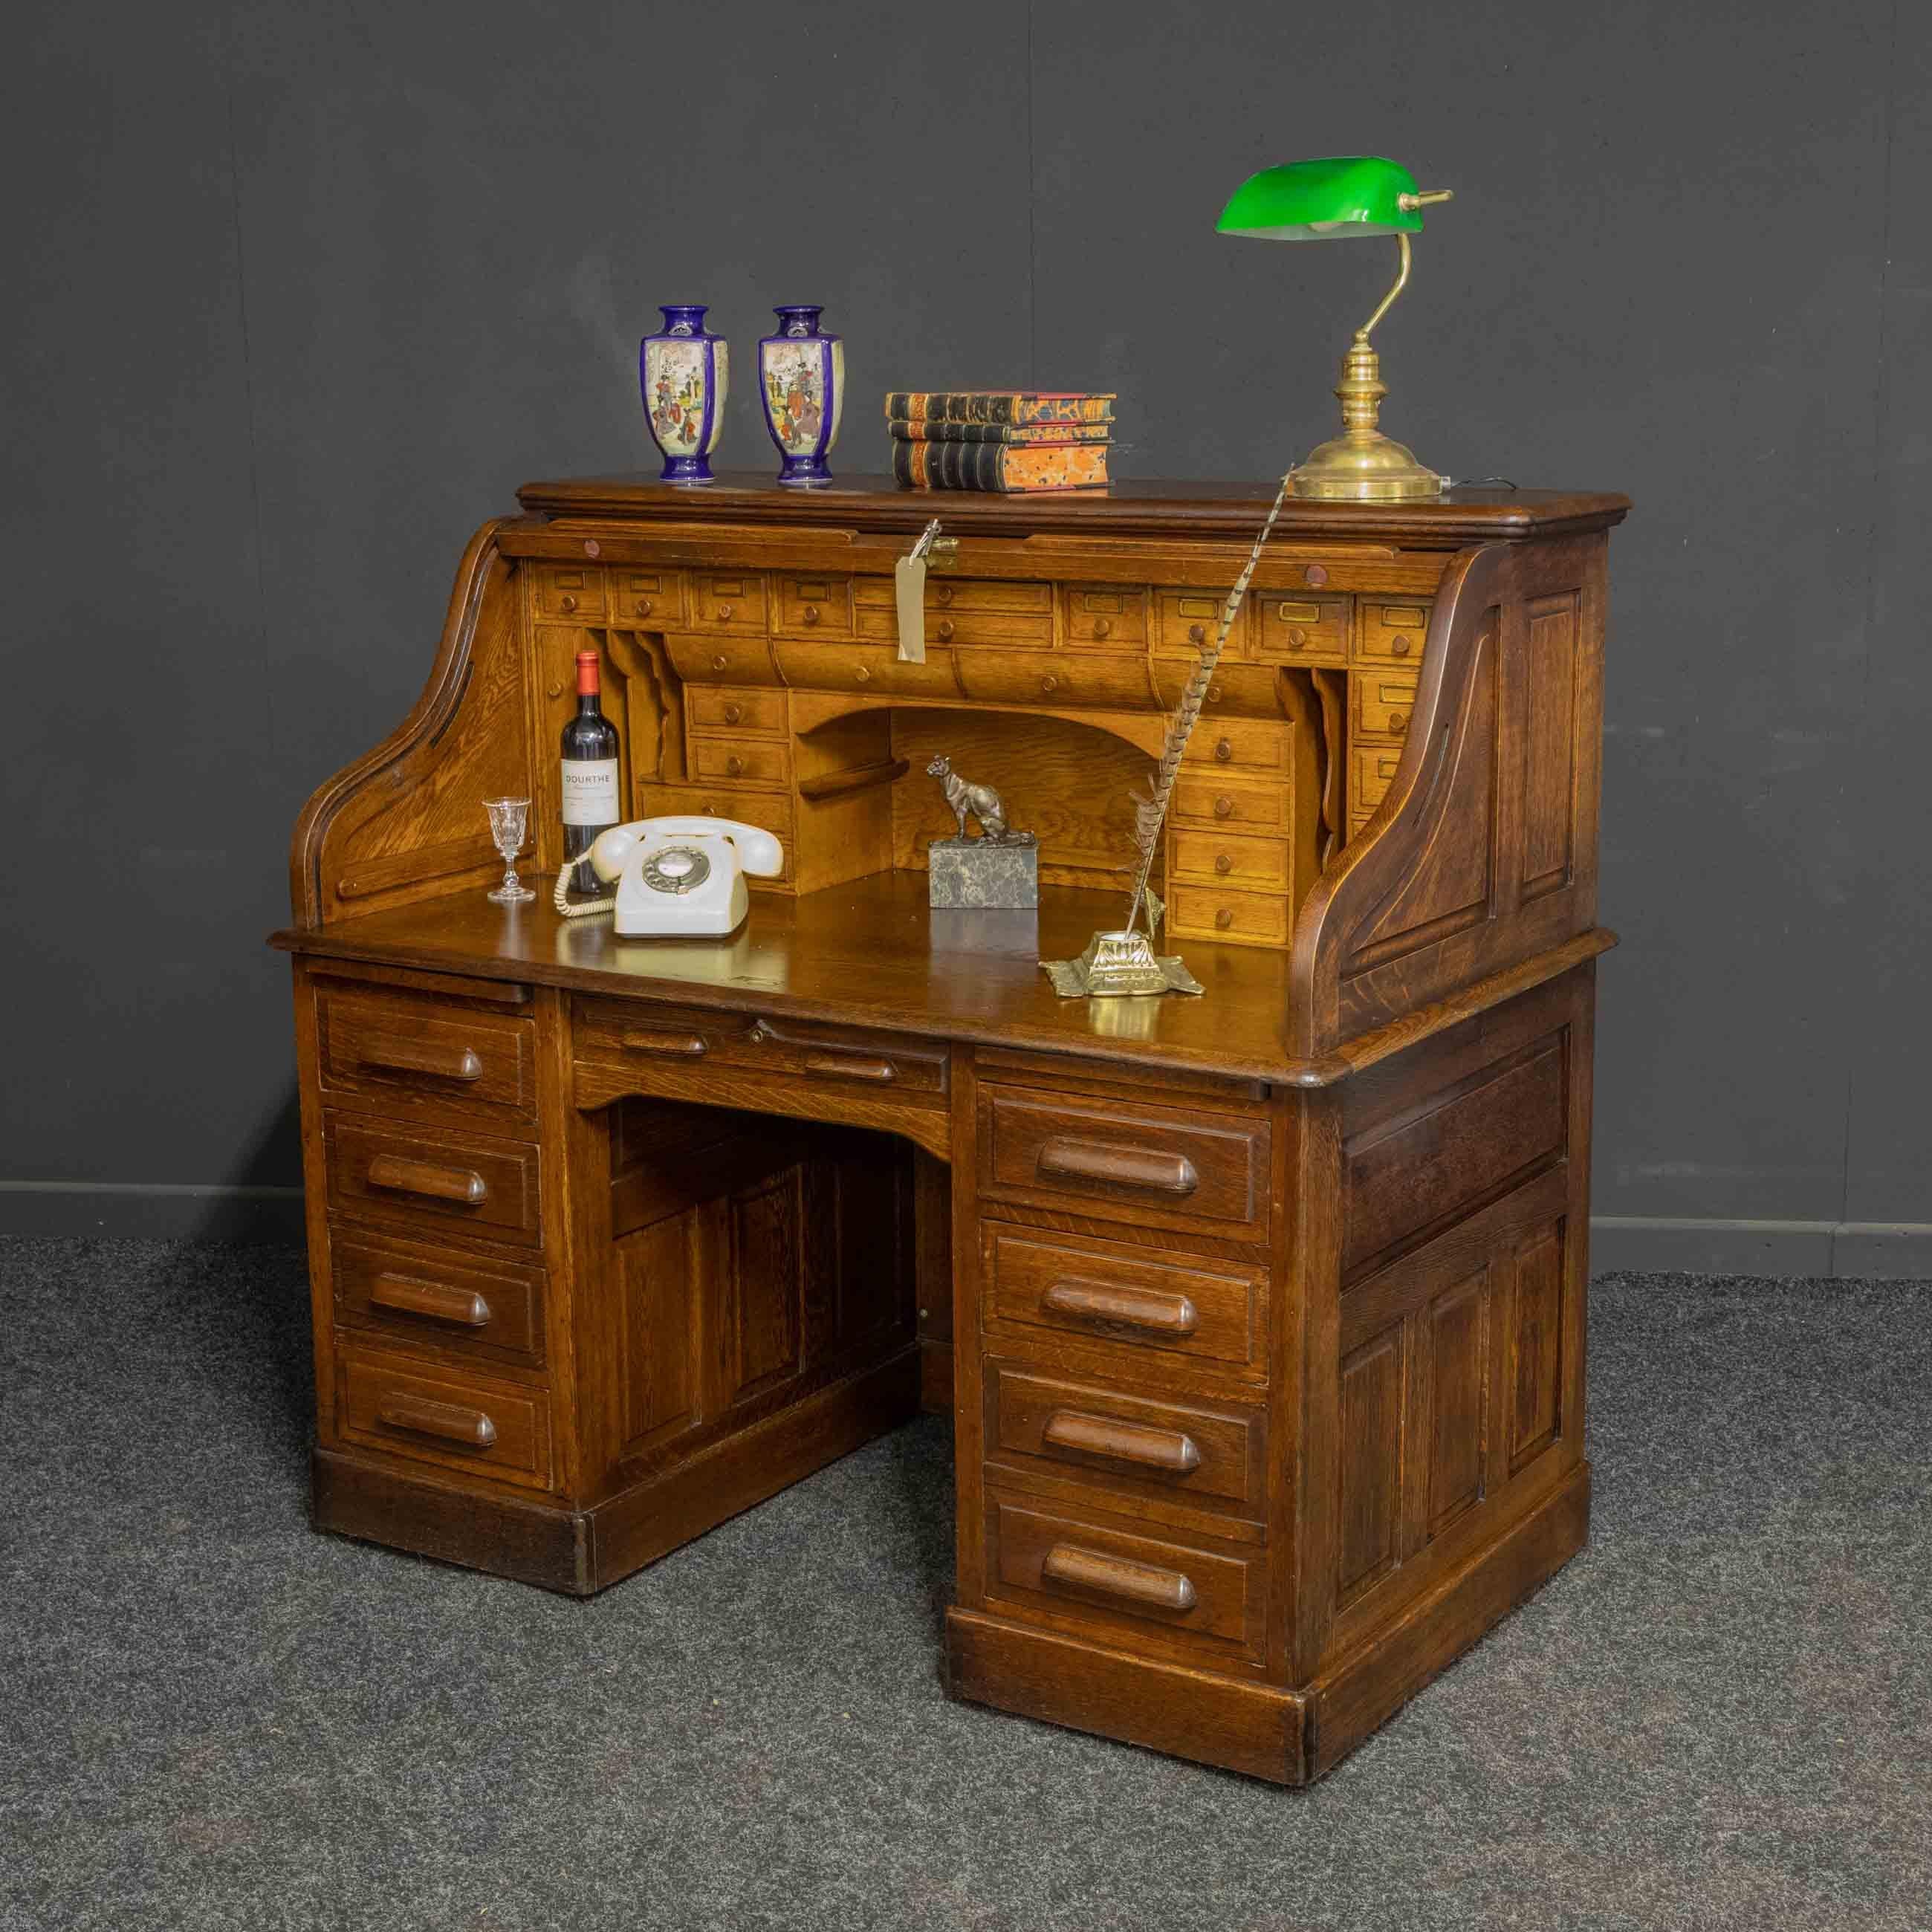 A fine quality oak roll top desk from the Edwardian period. As with most quality roll top desks all the exterior panels are fielded (bevelled) and can look and be used off the wall. All the pedestal drawers lock automatically when the roll is down